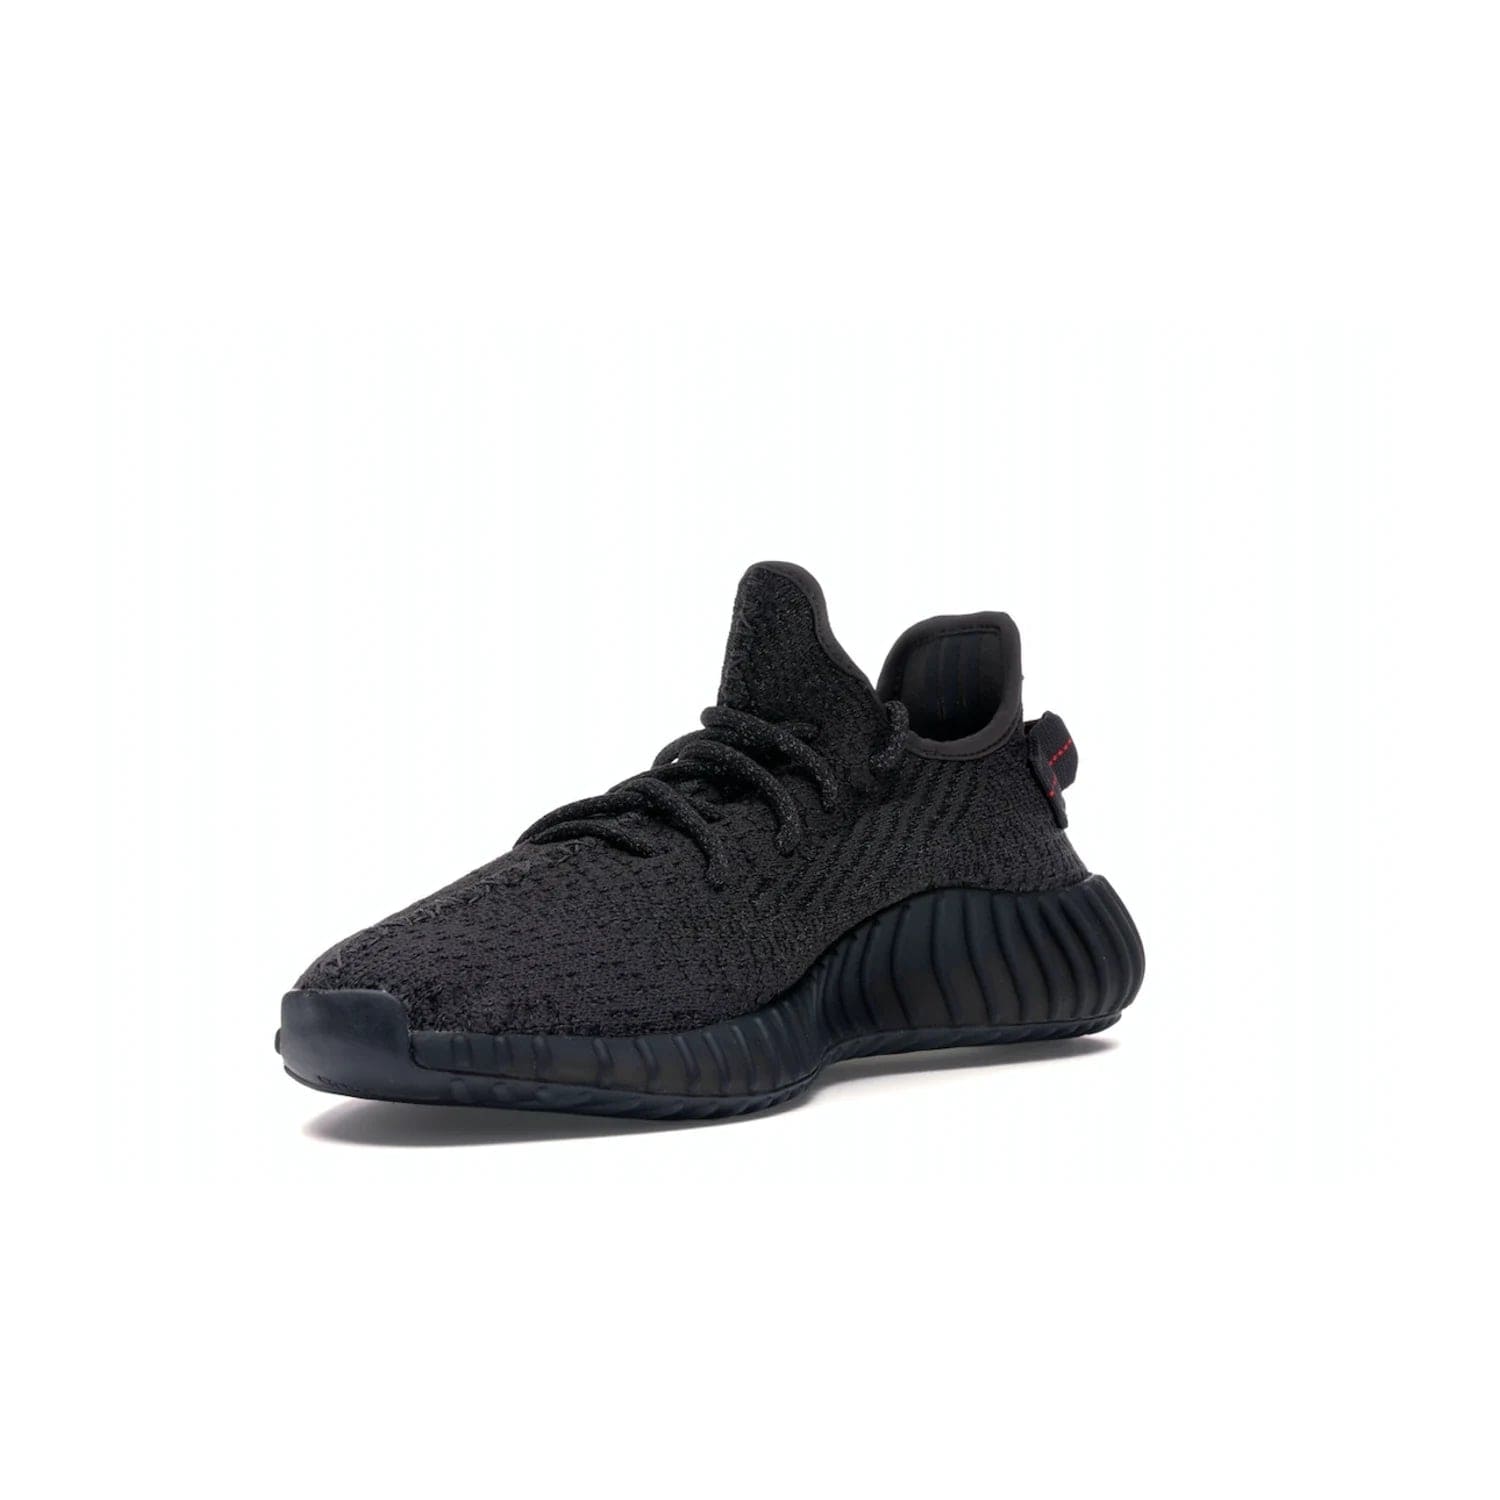 adidas Yeezy Boost 350 V2 Static Black (Reflective) - Image 14 - Only at www.BallersClubKickz.com - Make a statement with the adidas Yeezy Boost 350 V2 Static Black Reflective. All-black upper, reflective accents, midsole, and sole combine for a stylish look. High quality materials. June 2019 release. Add to your collection today.